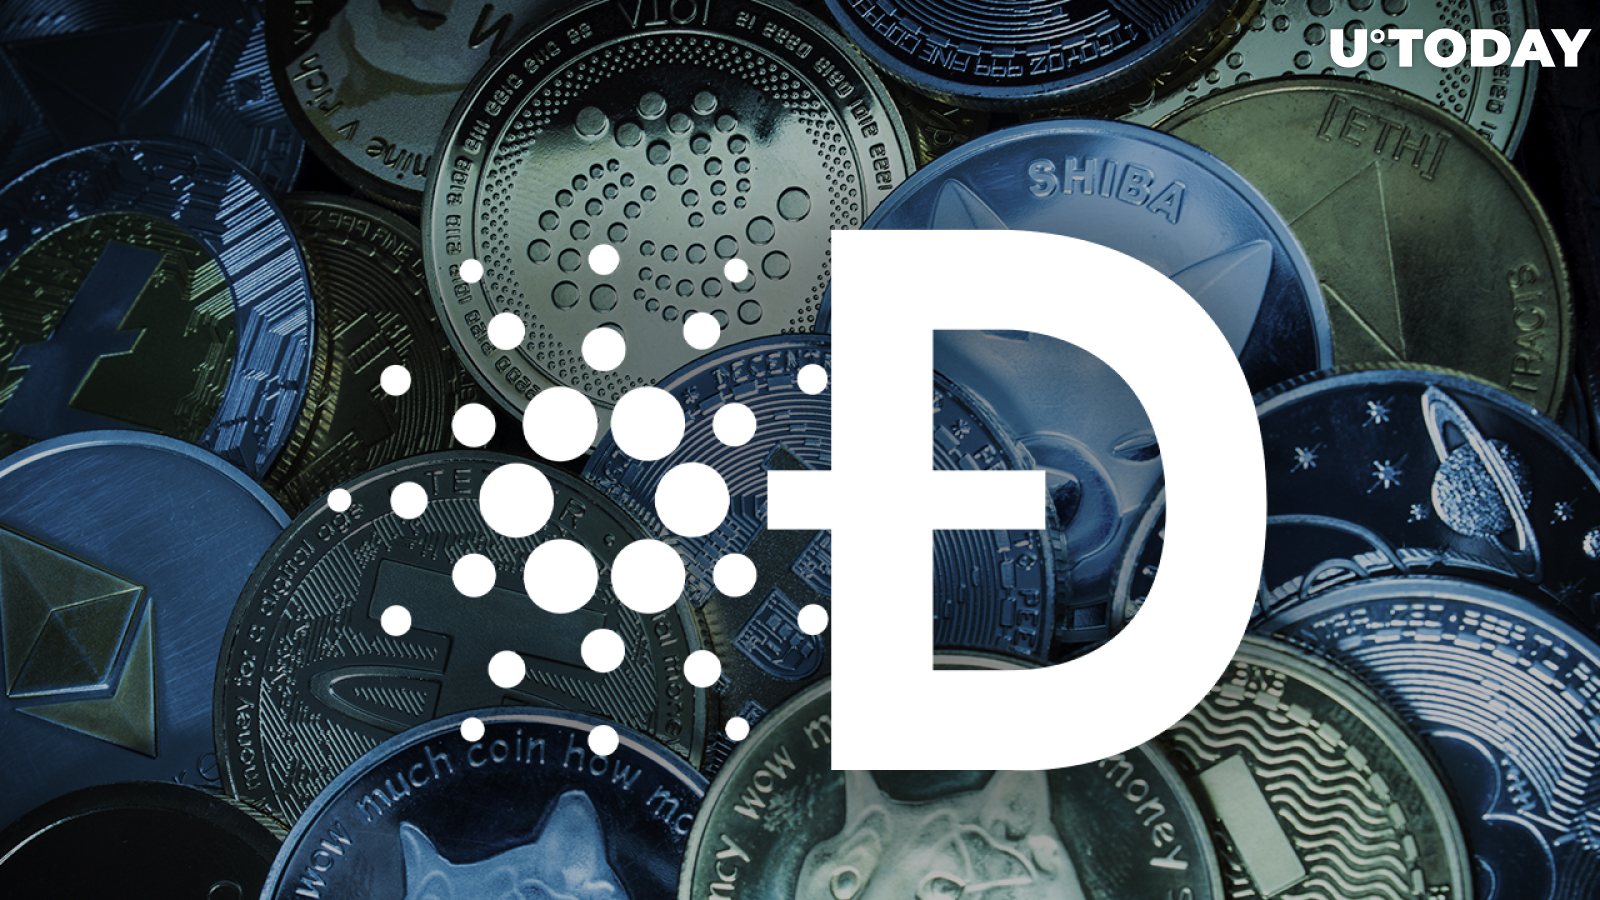 Cardano, Dogecoin Currently "Undervalued" According to This Metric: Details